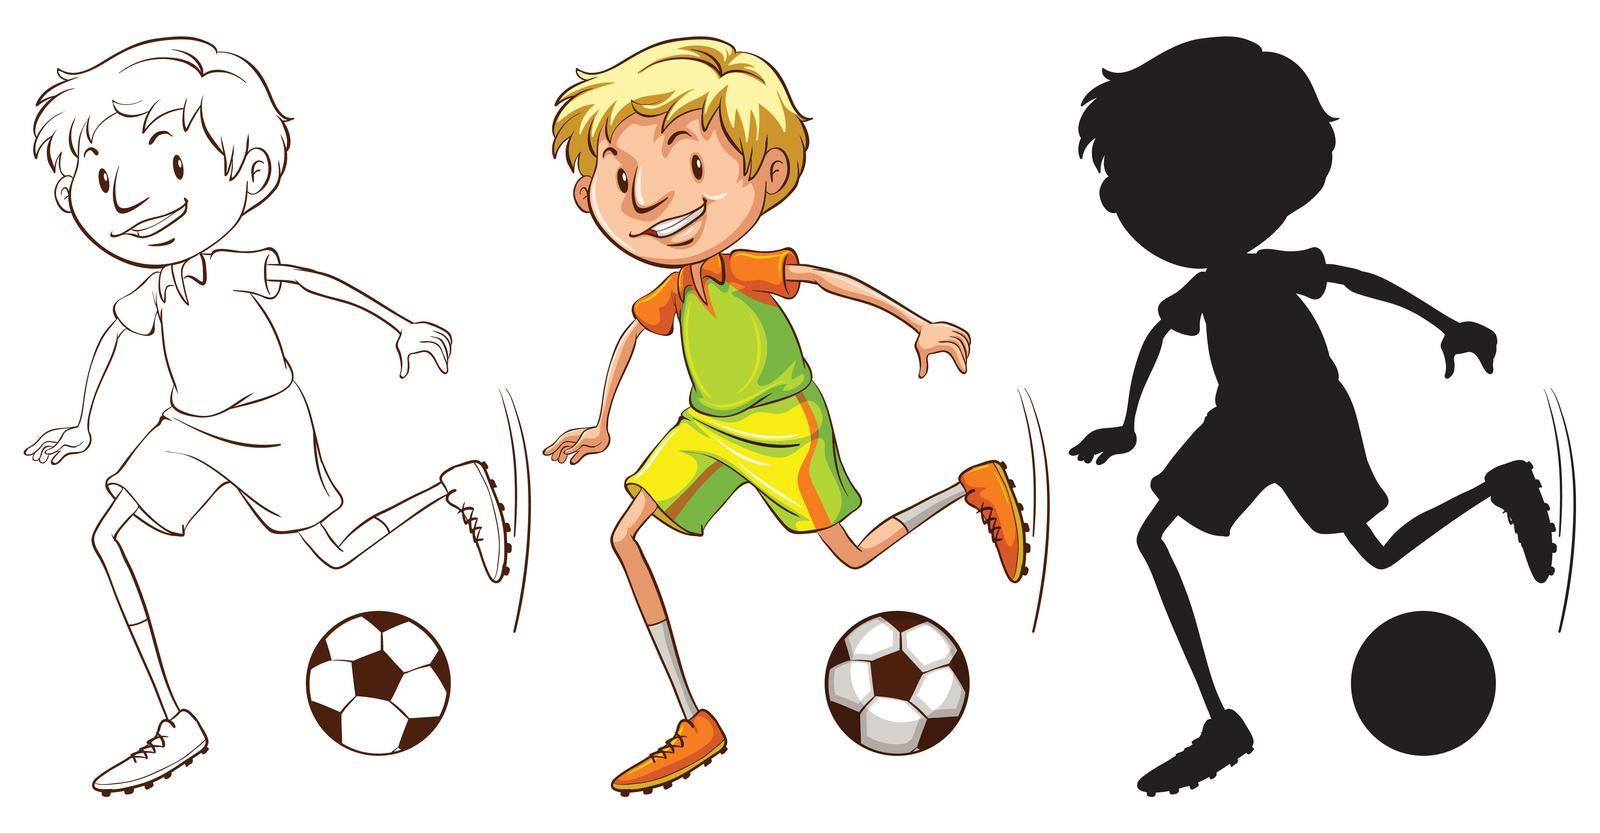 Illustration of a boy playing football